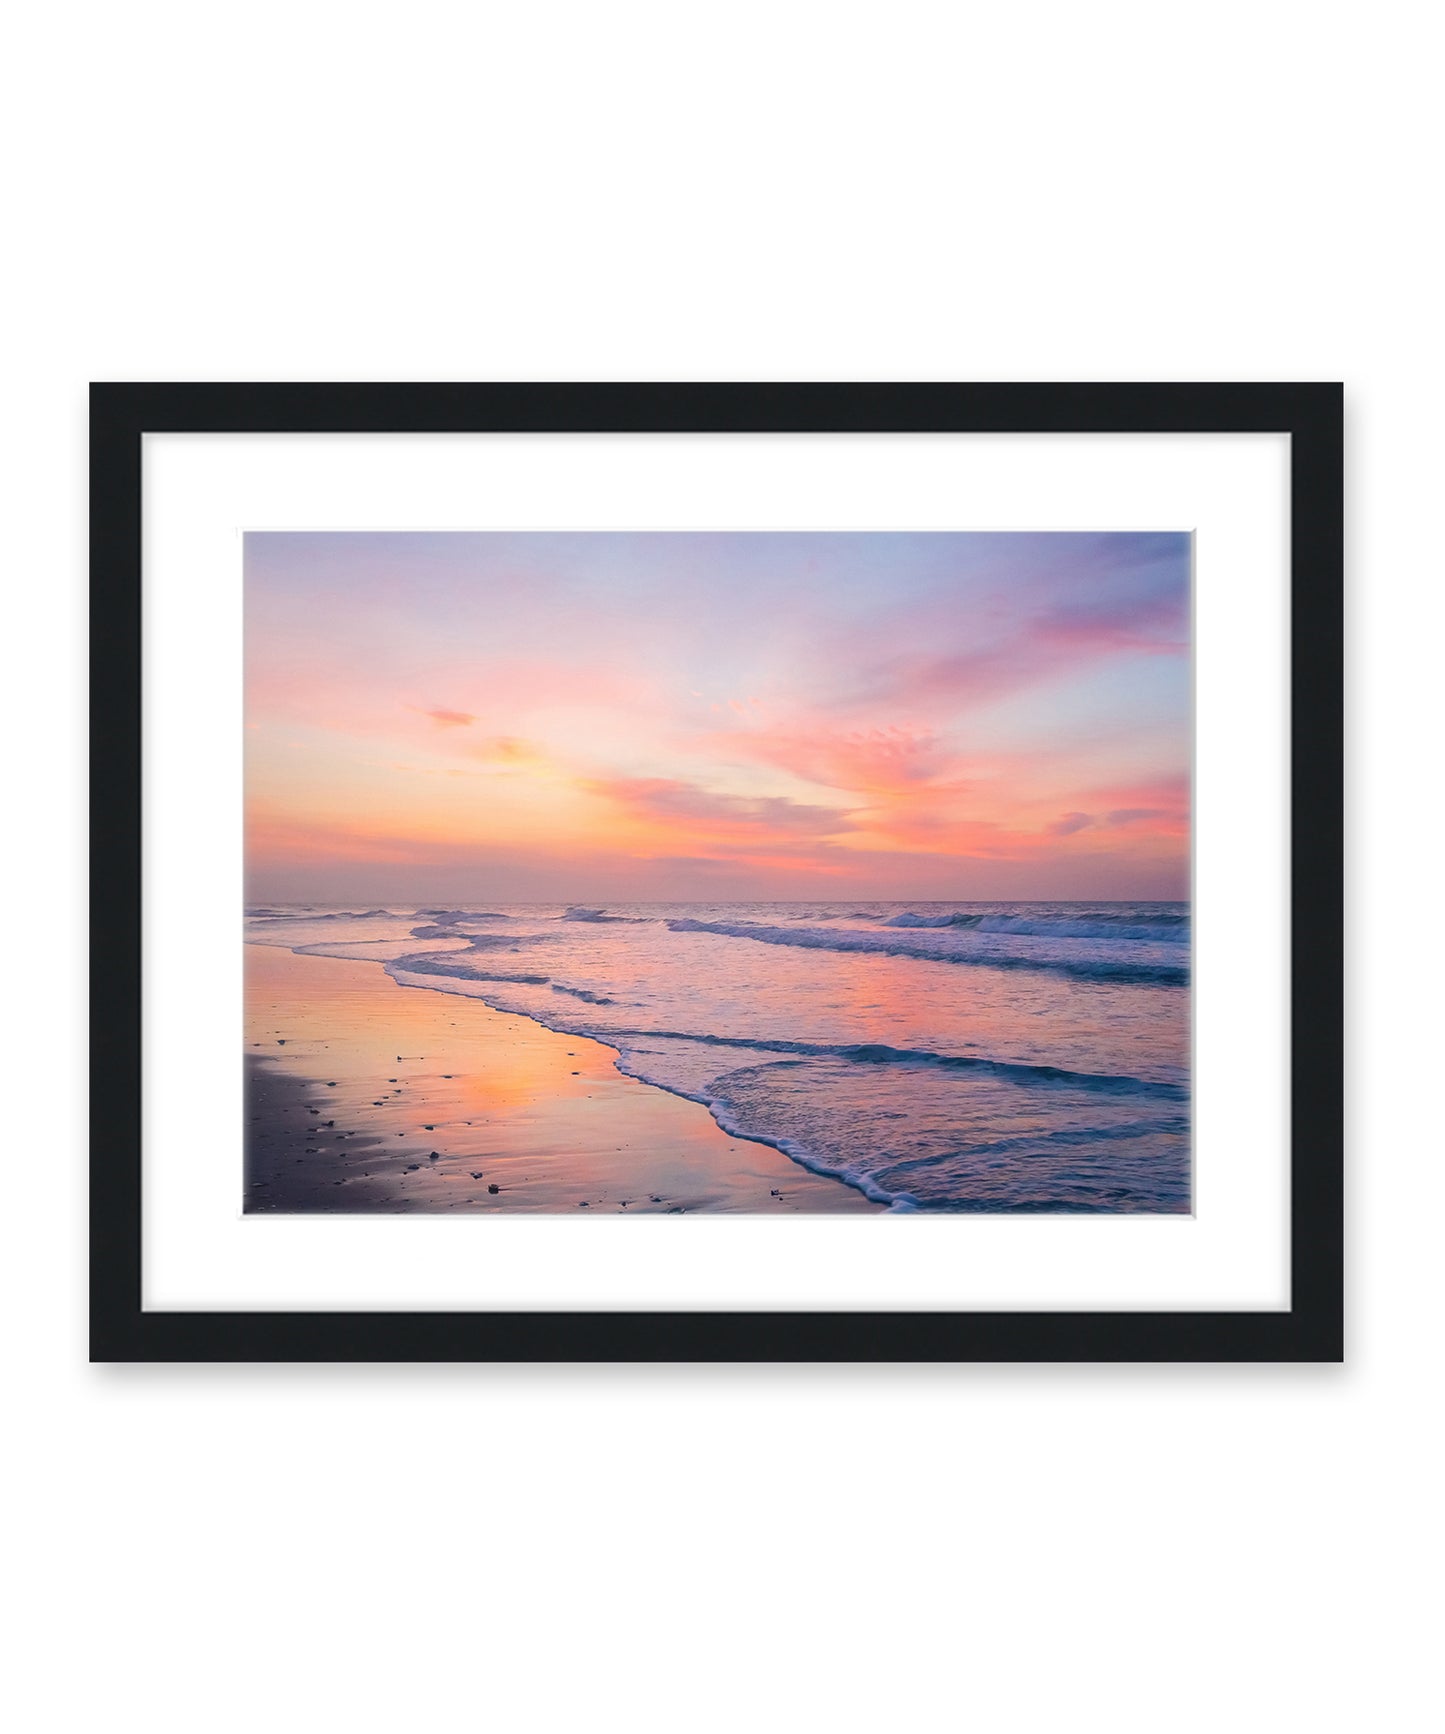 colorful pink and purple sunrise Wrightsville beach photograph, black frame by Wright and Roam